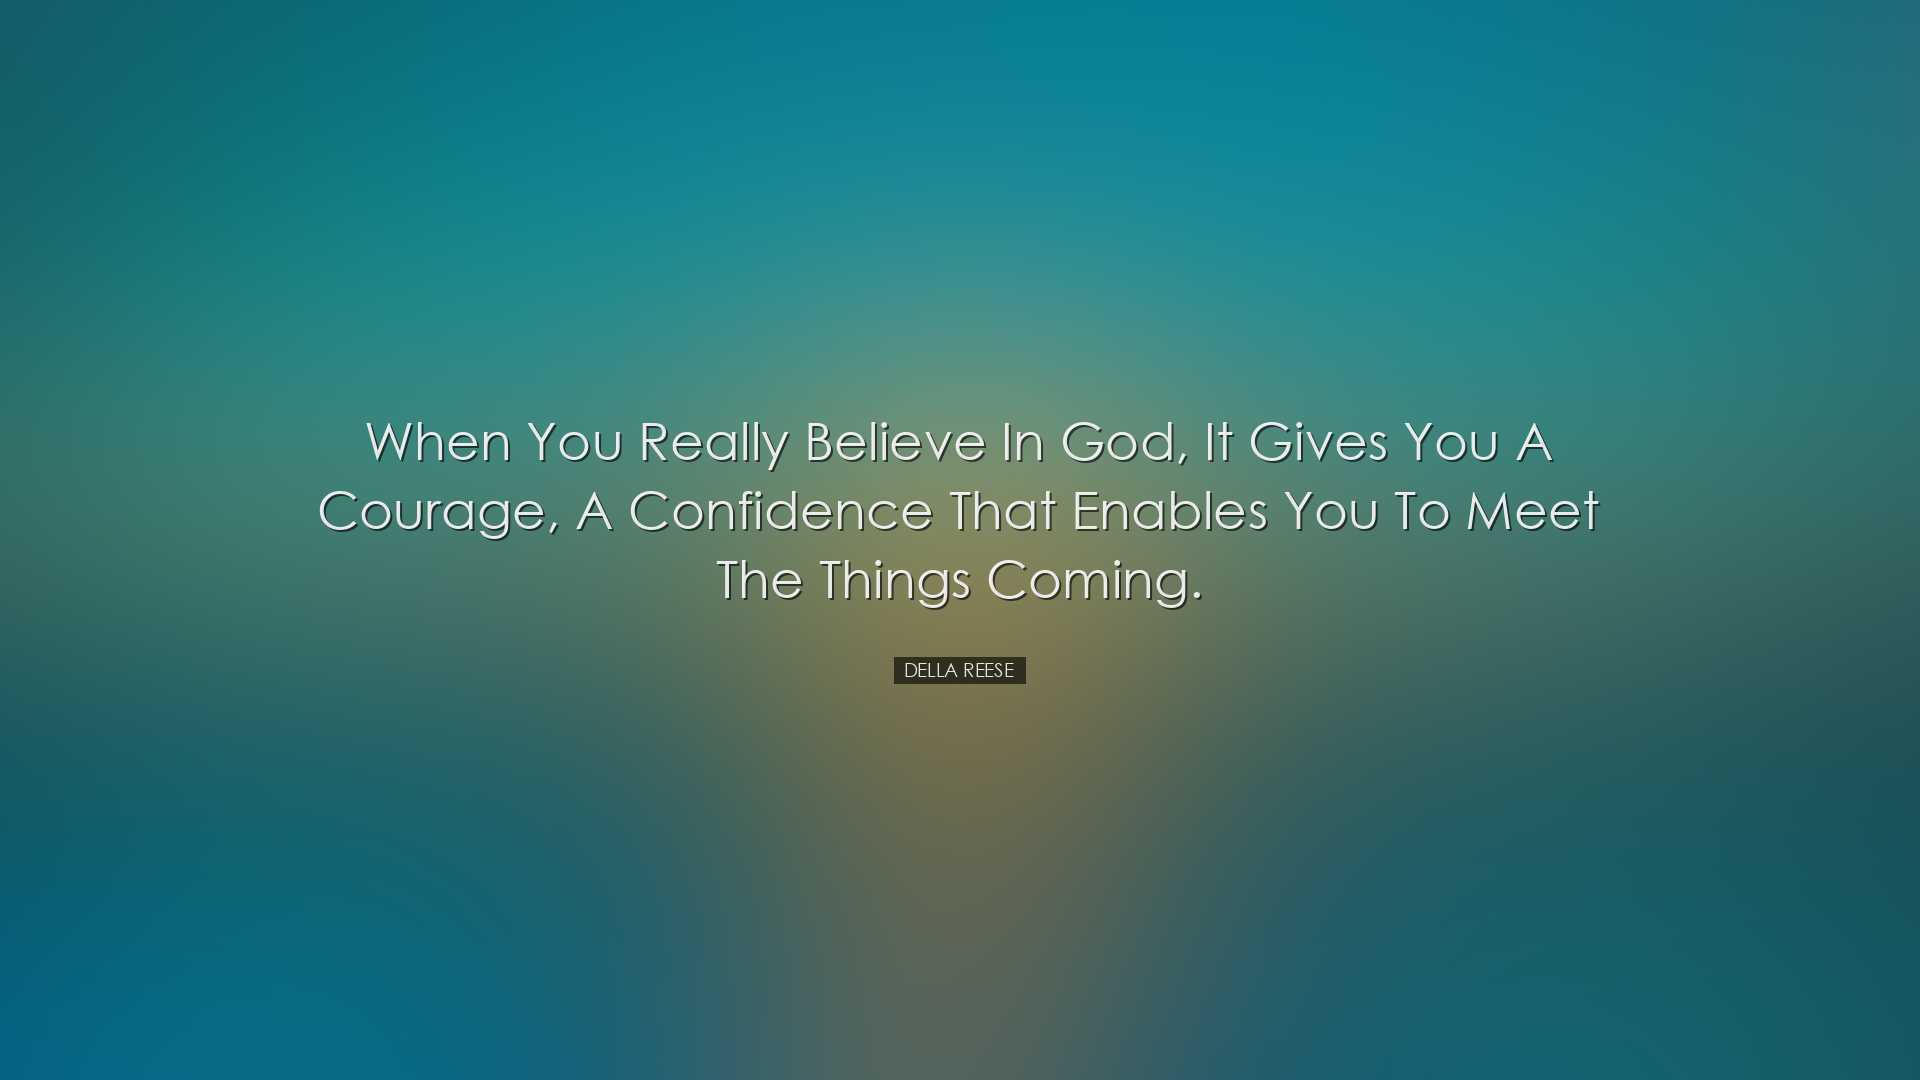 When you really believe in God, it gives you a courage, a confiden